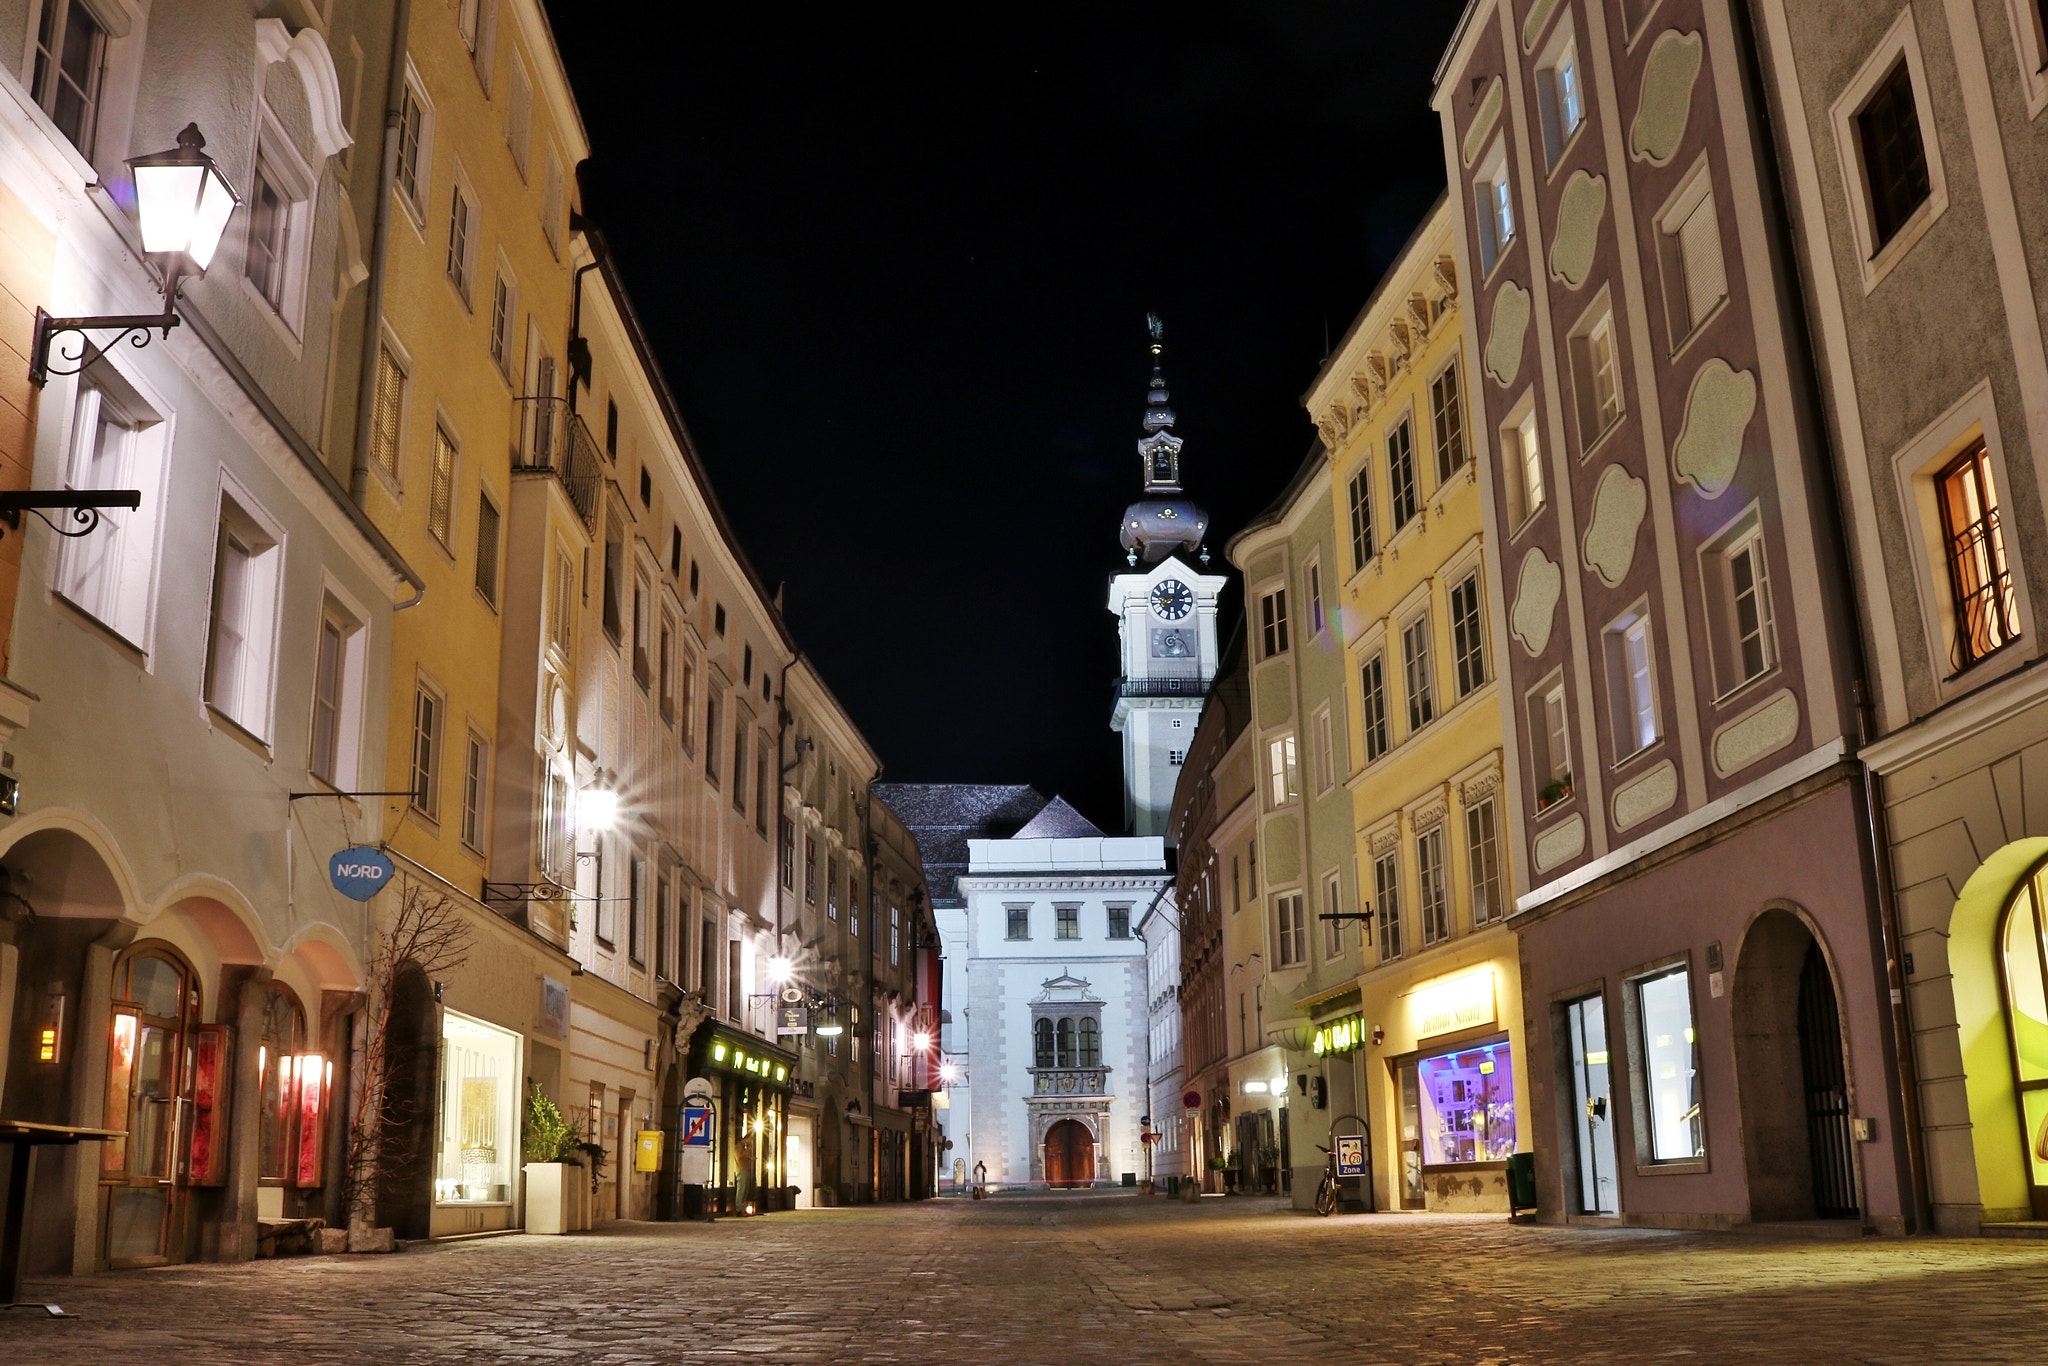 IS STM sample photo. Old town of linz / austria photography